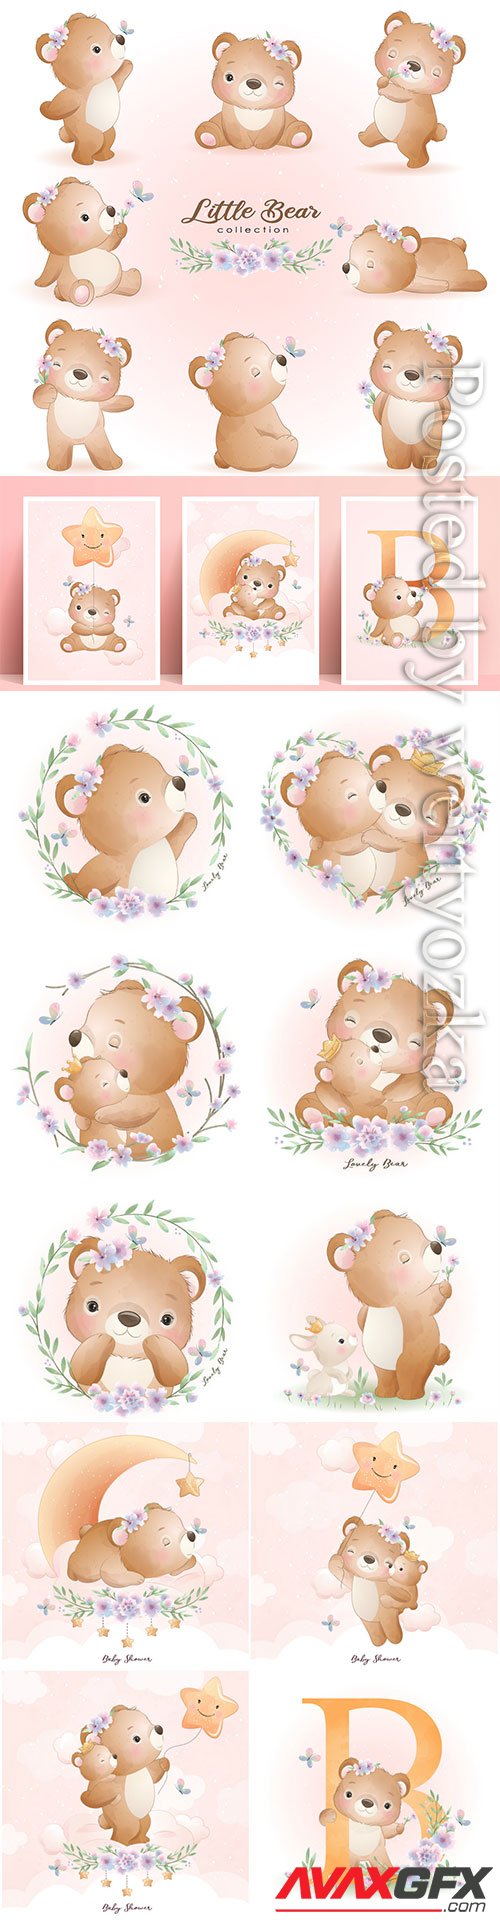 Cute doodle bear poses with floral set illustration premium vector